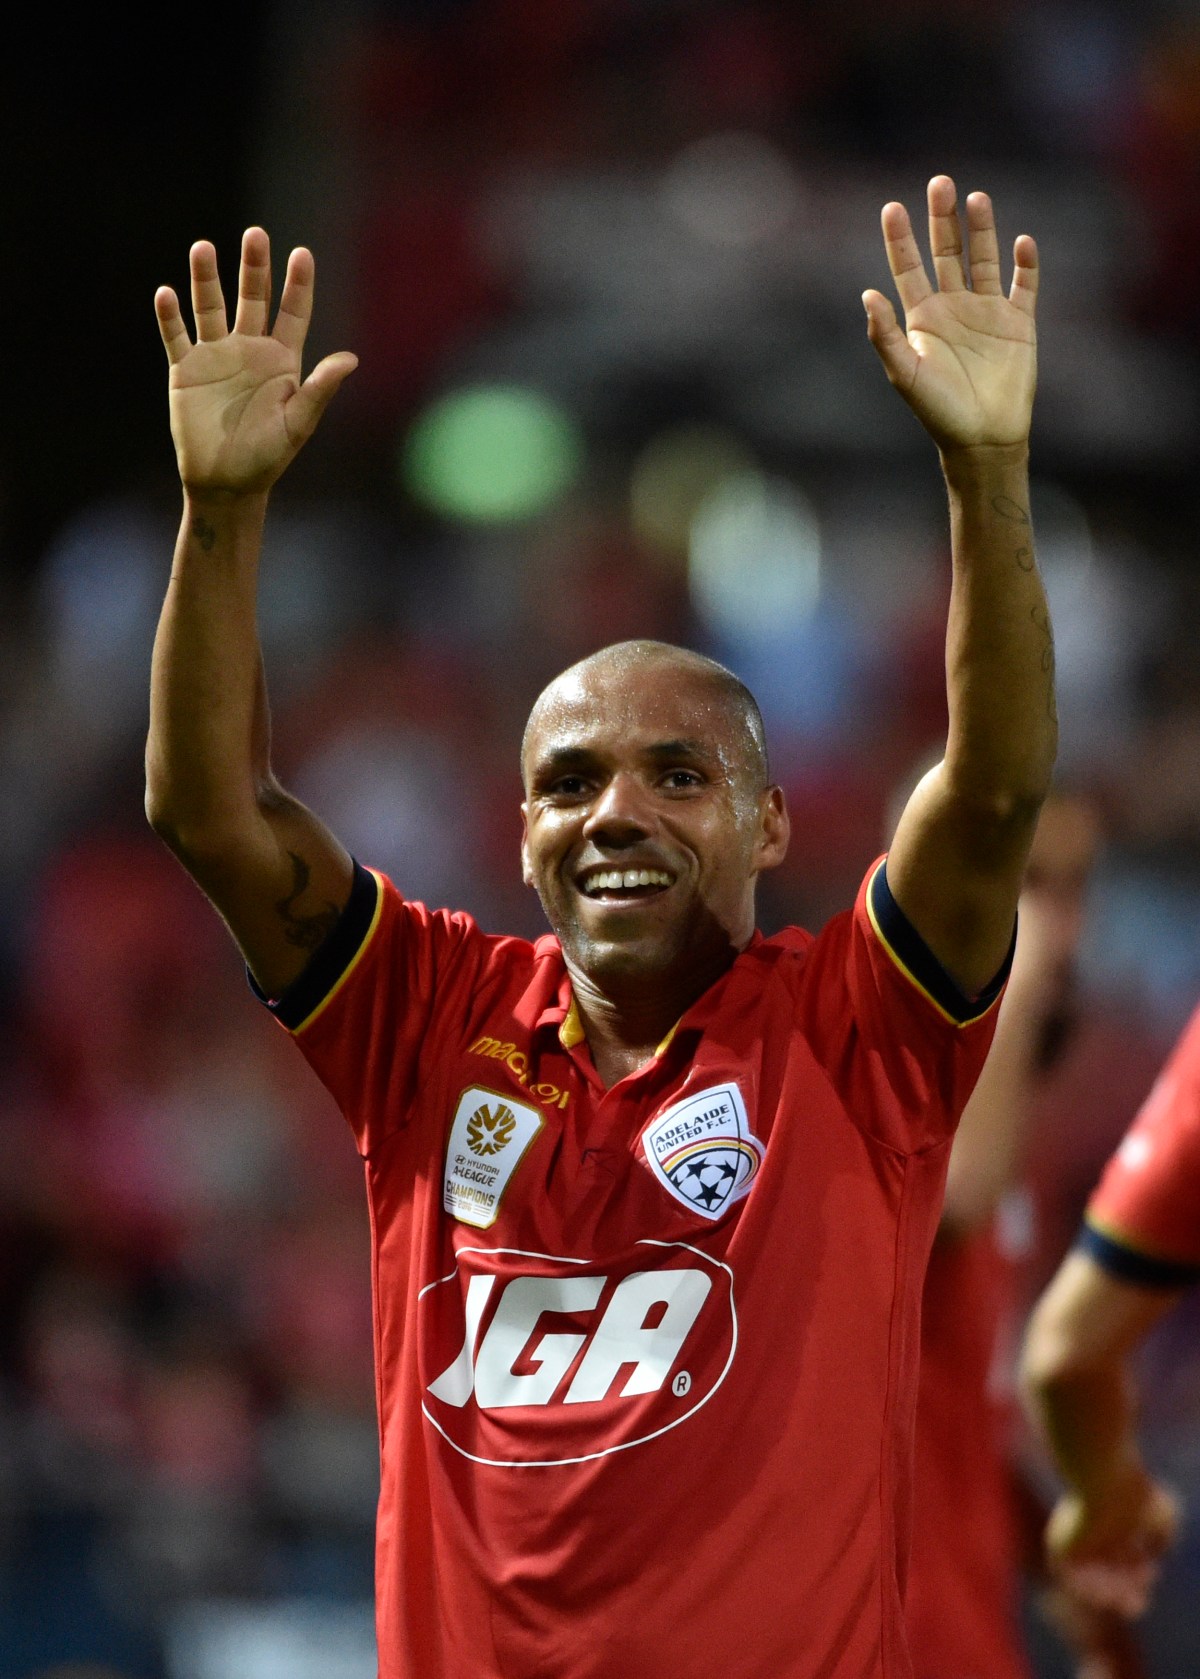 Henrique Adriano Buss of United celebrates his goal during the Round 2 A-League match between Adelaide United and the Western Sydney Wanderers at Cooper Stadium in Adelaide, Friday, Oct. 14, 2016. (AAP Image/David Mariuz) NO ARCHIVING, EDITORIAL USE ONLY